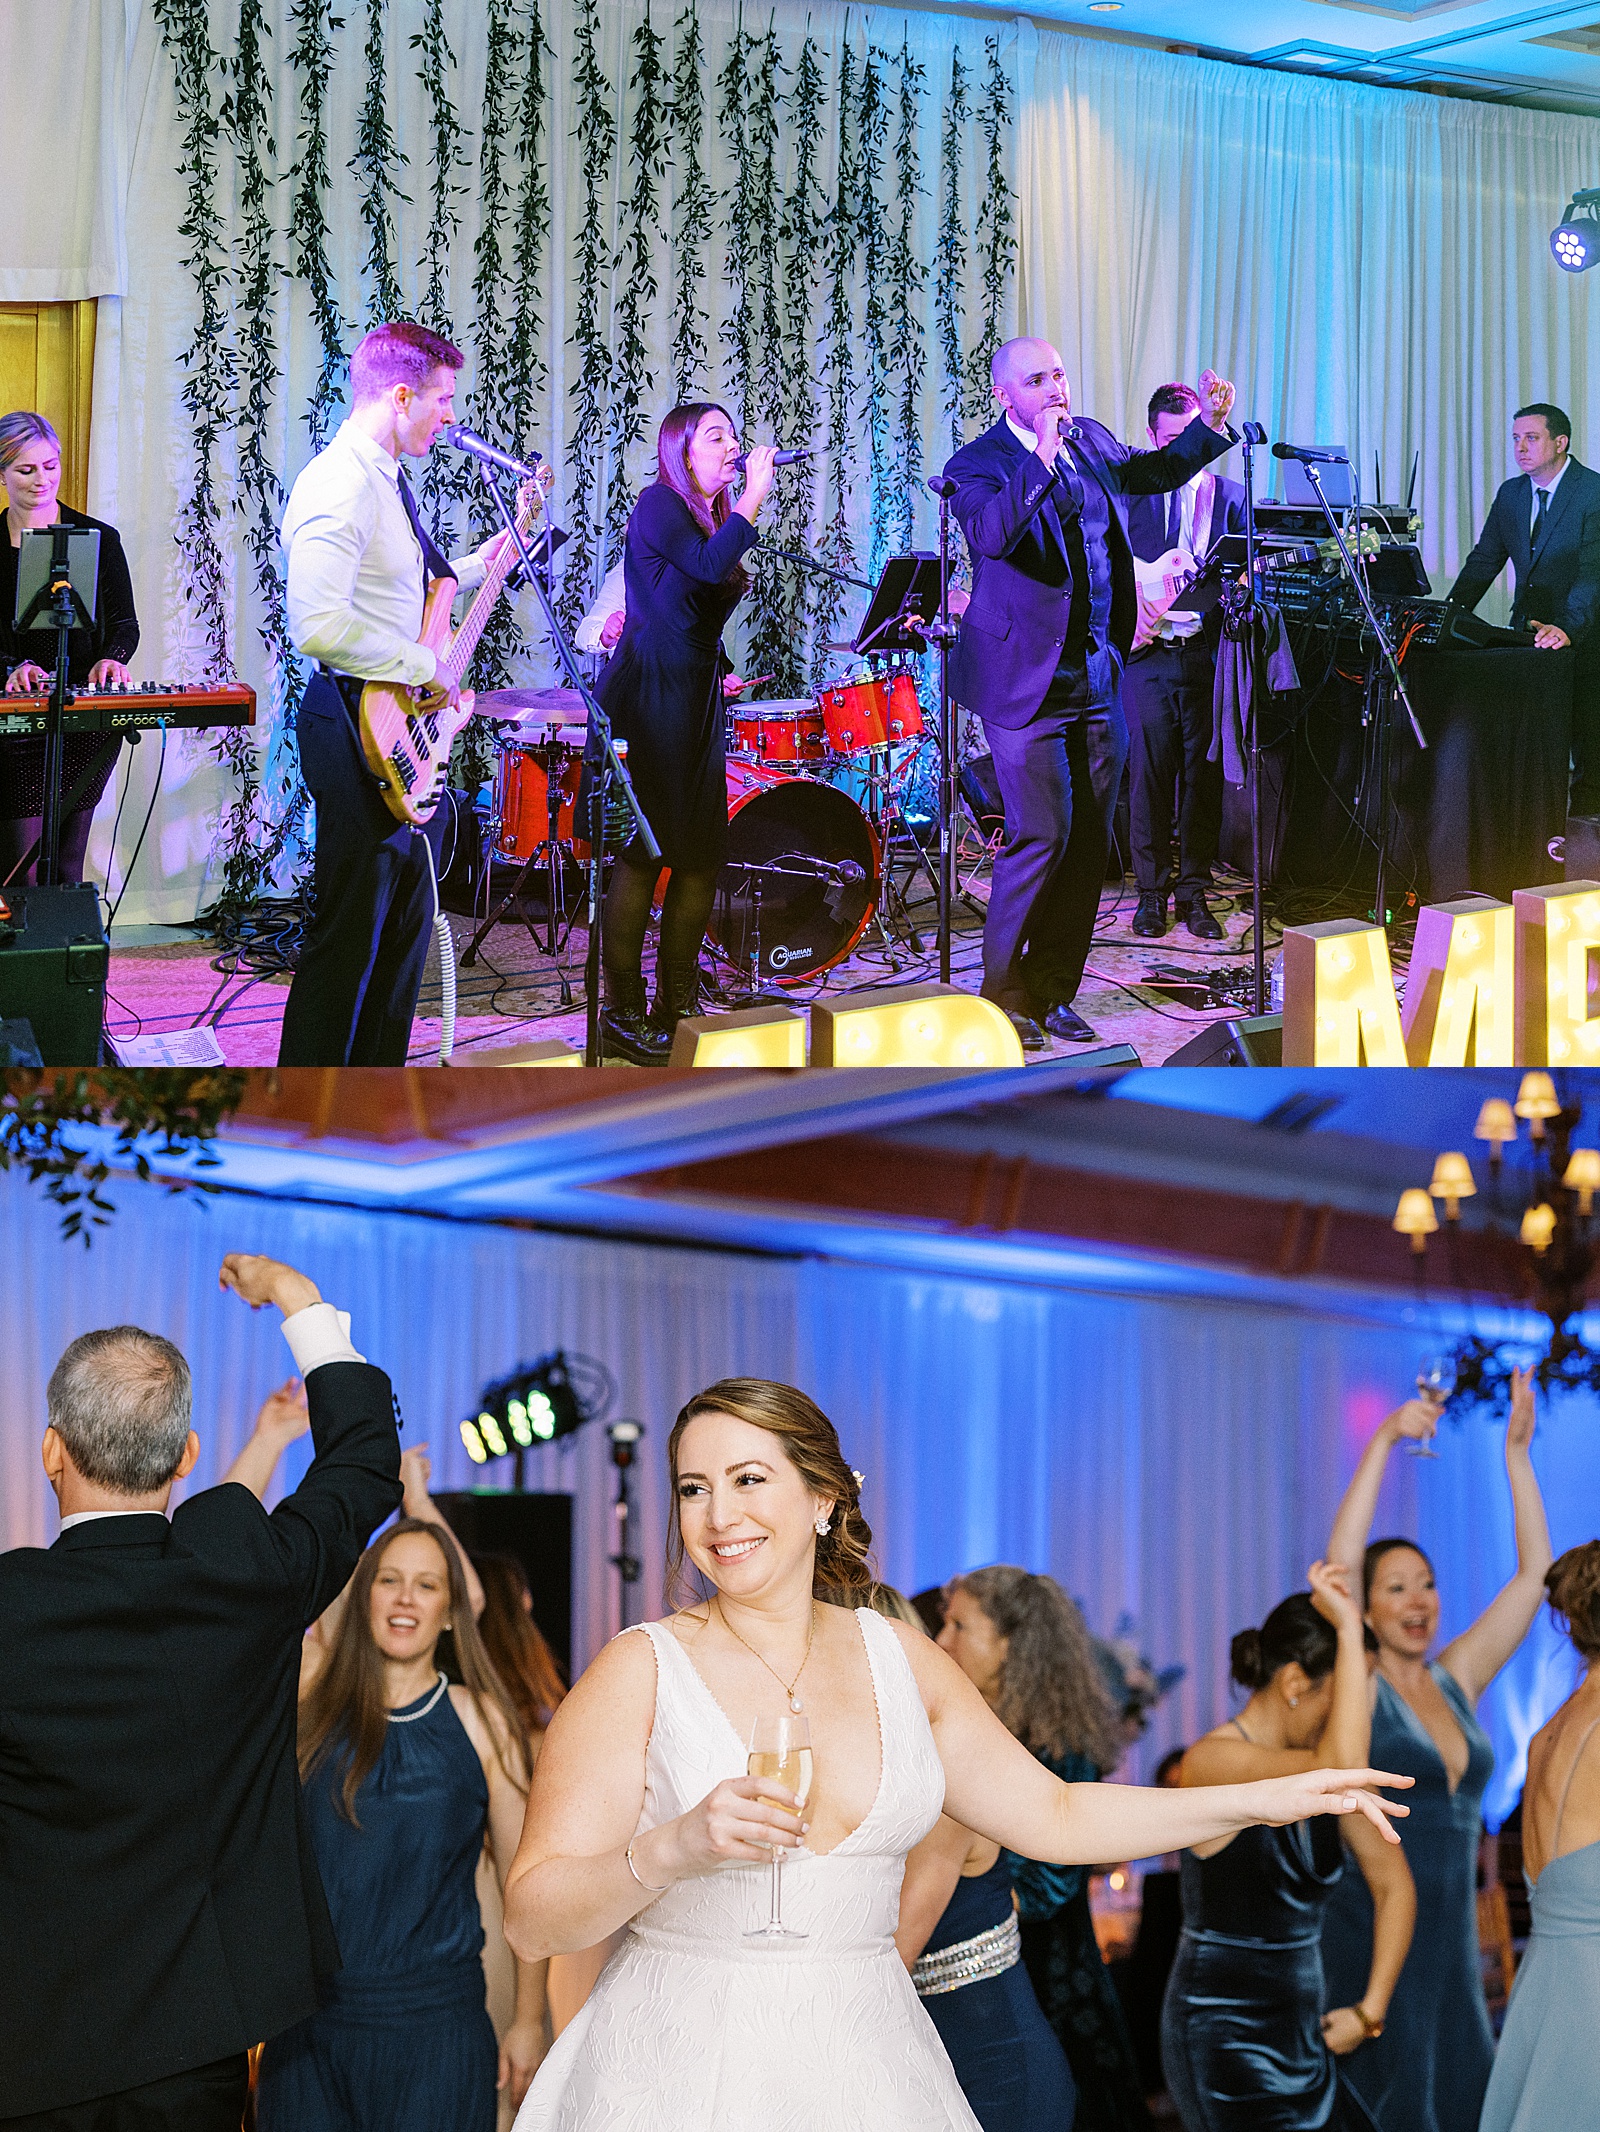 Band singing and playing music at a fun wedding reception in Cape cod